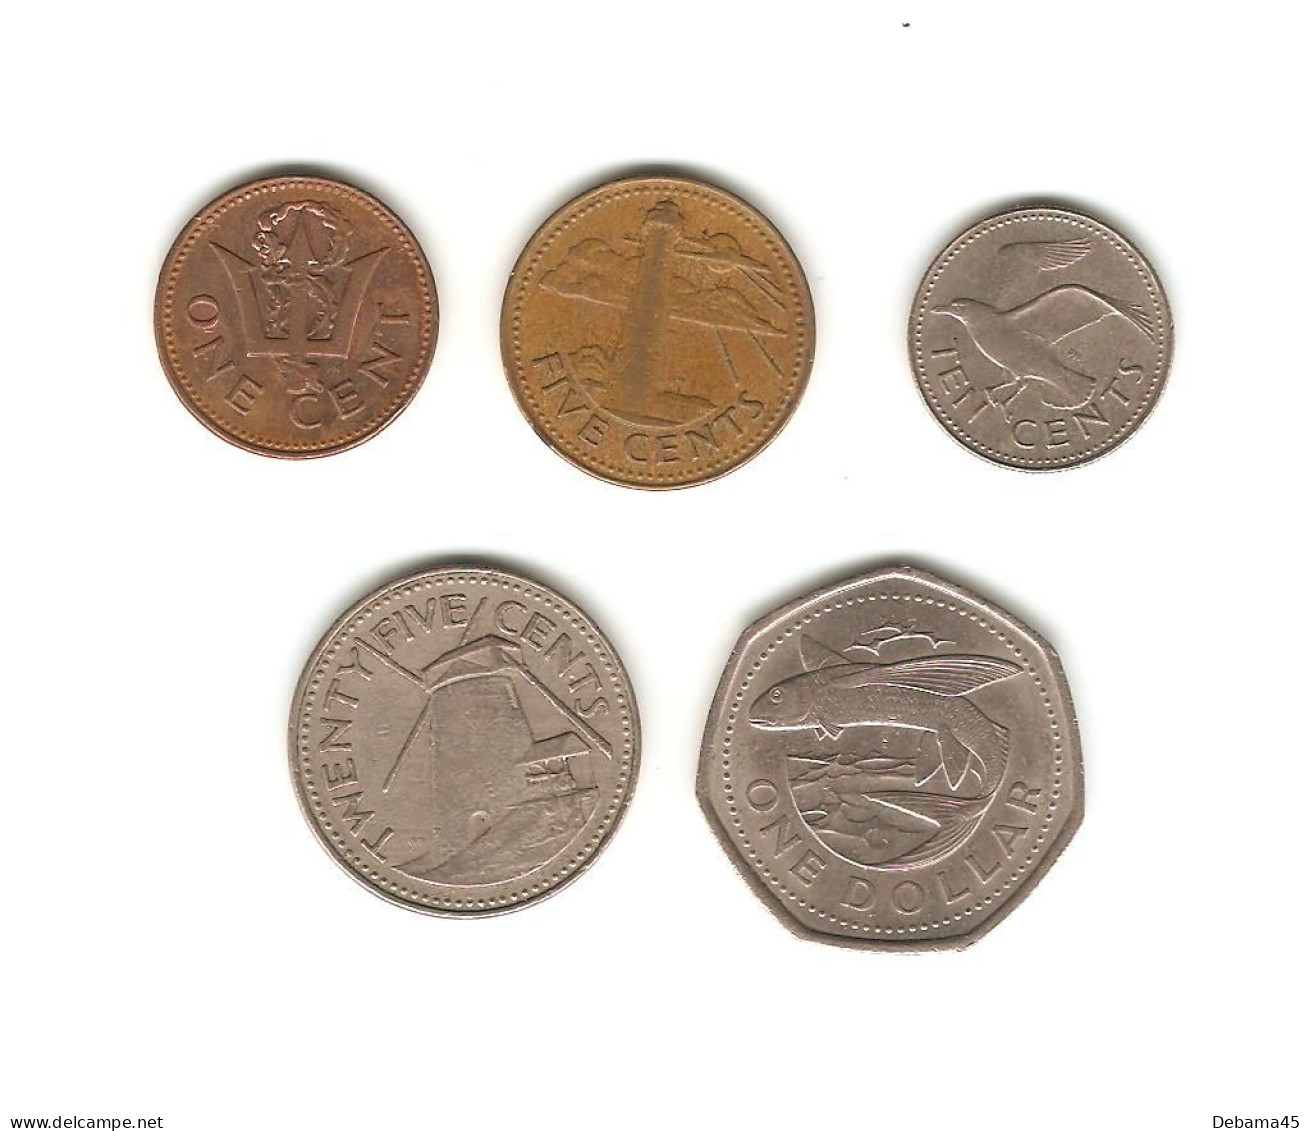 424/ BARBADES : 1 Cent 1982 - 5 Cents 1979 - 10 Cents 1987 - 25 Cents 1978 - 1 Dollar 1988 - Barbados